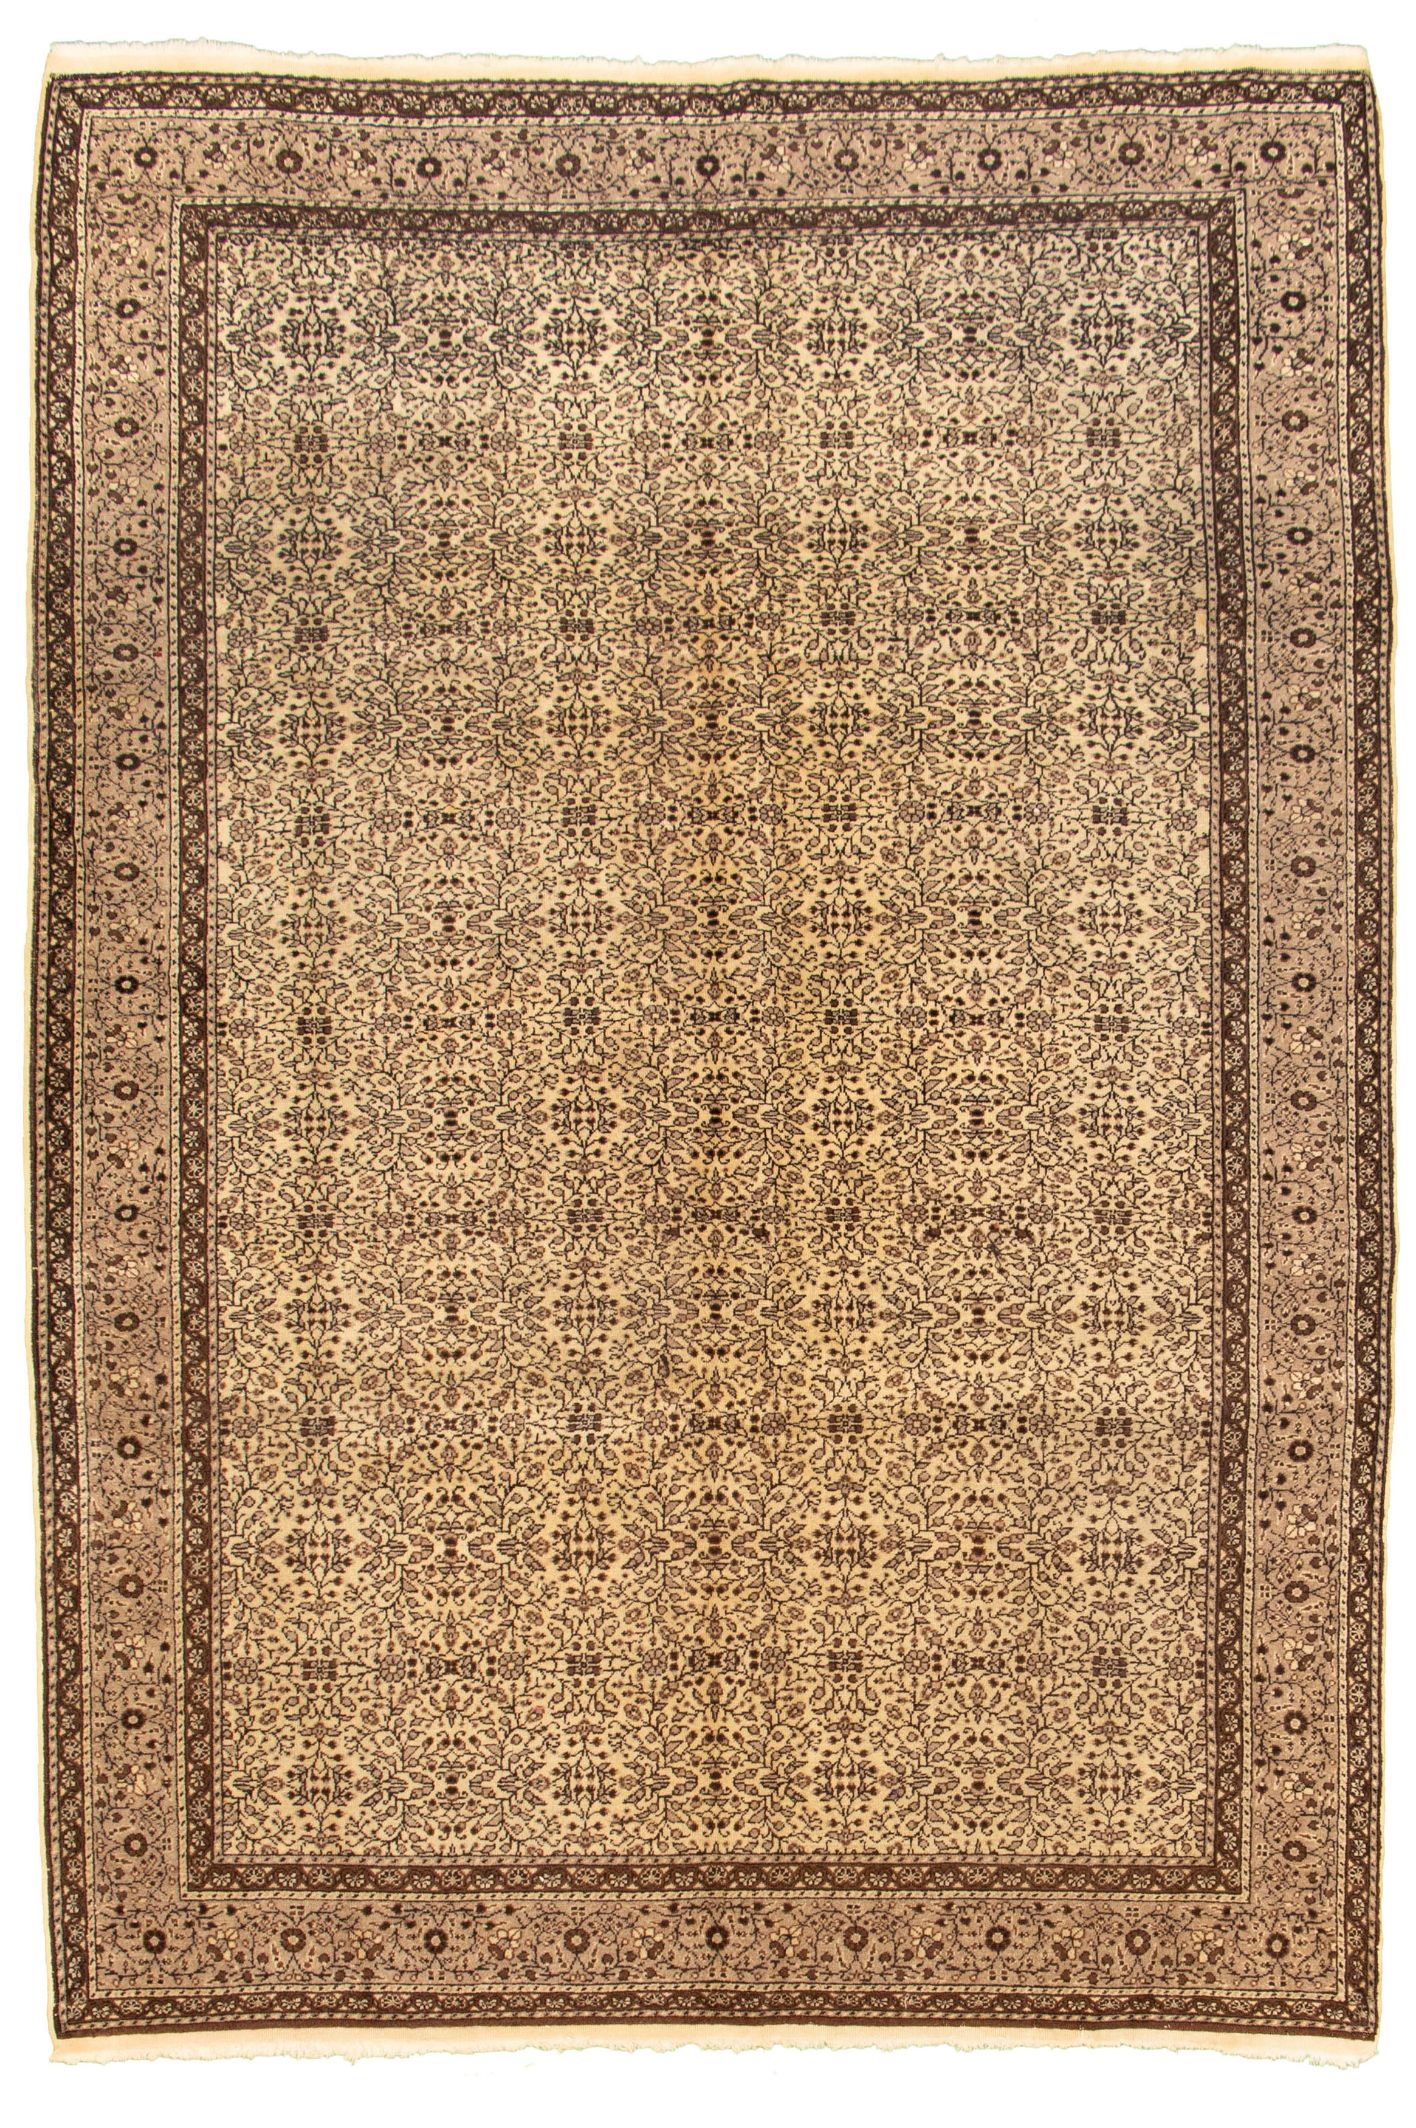 Hand-knotted Keisari Vintage Cream Wool Rug 6'5" x 9'8"  Size: 6'5" x 9'8"  